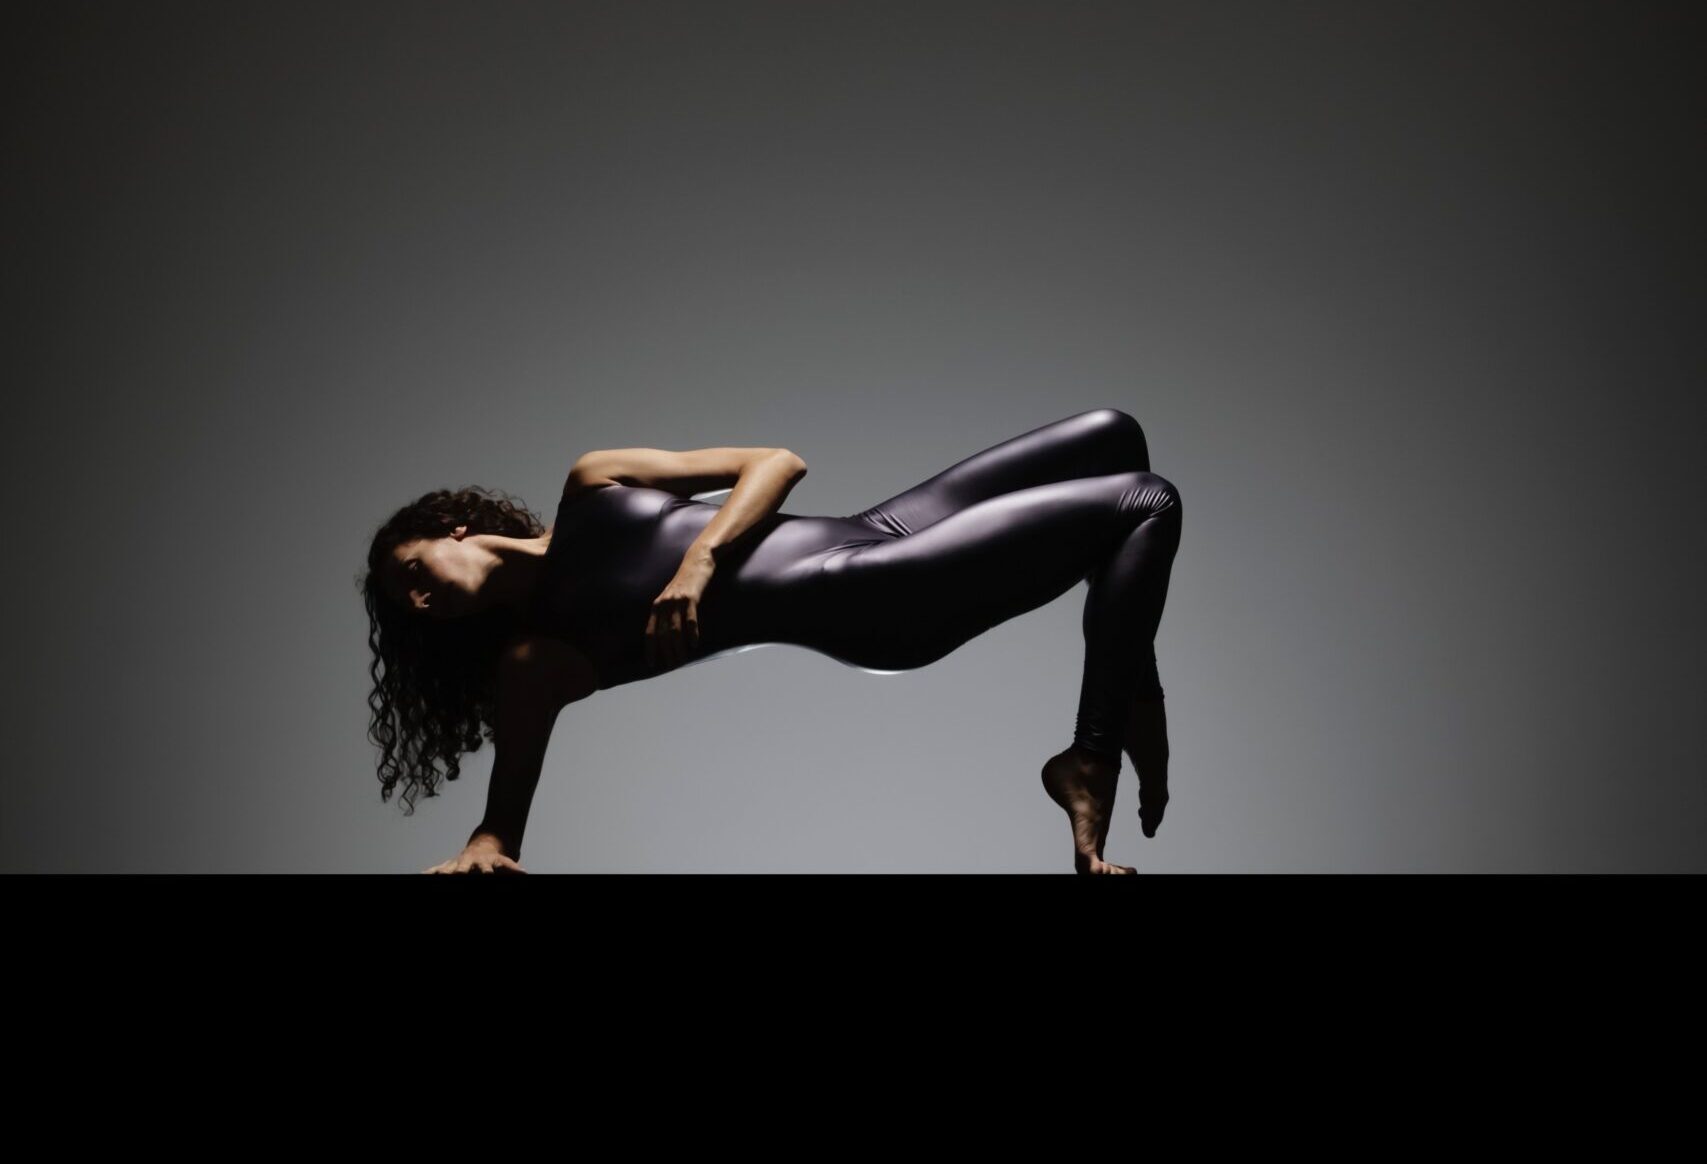 In front of a gray backdrop, Ilaria Guerra does a stylized bridge pose in a shiny grayish-purple unitard. Her long dark curly hair is down, and as she uses her right arm and toes on forced arch for support, she twists toward the camera with her left arm crossing over her chest.